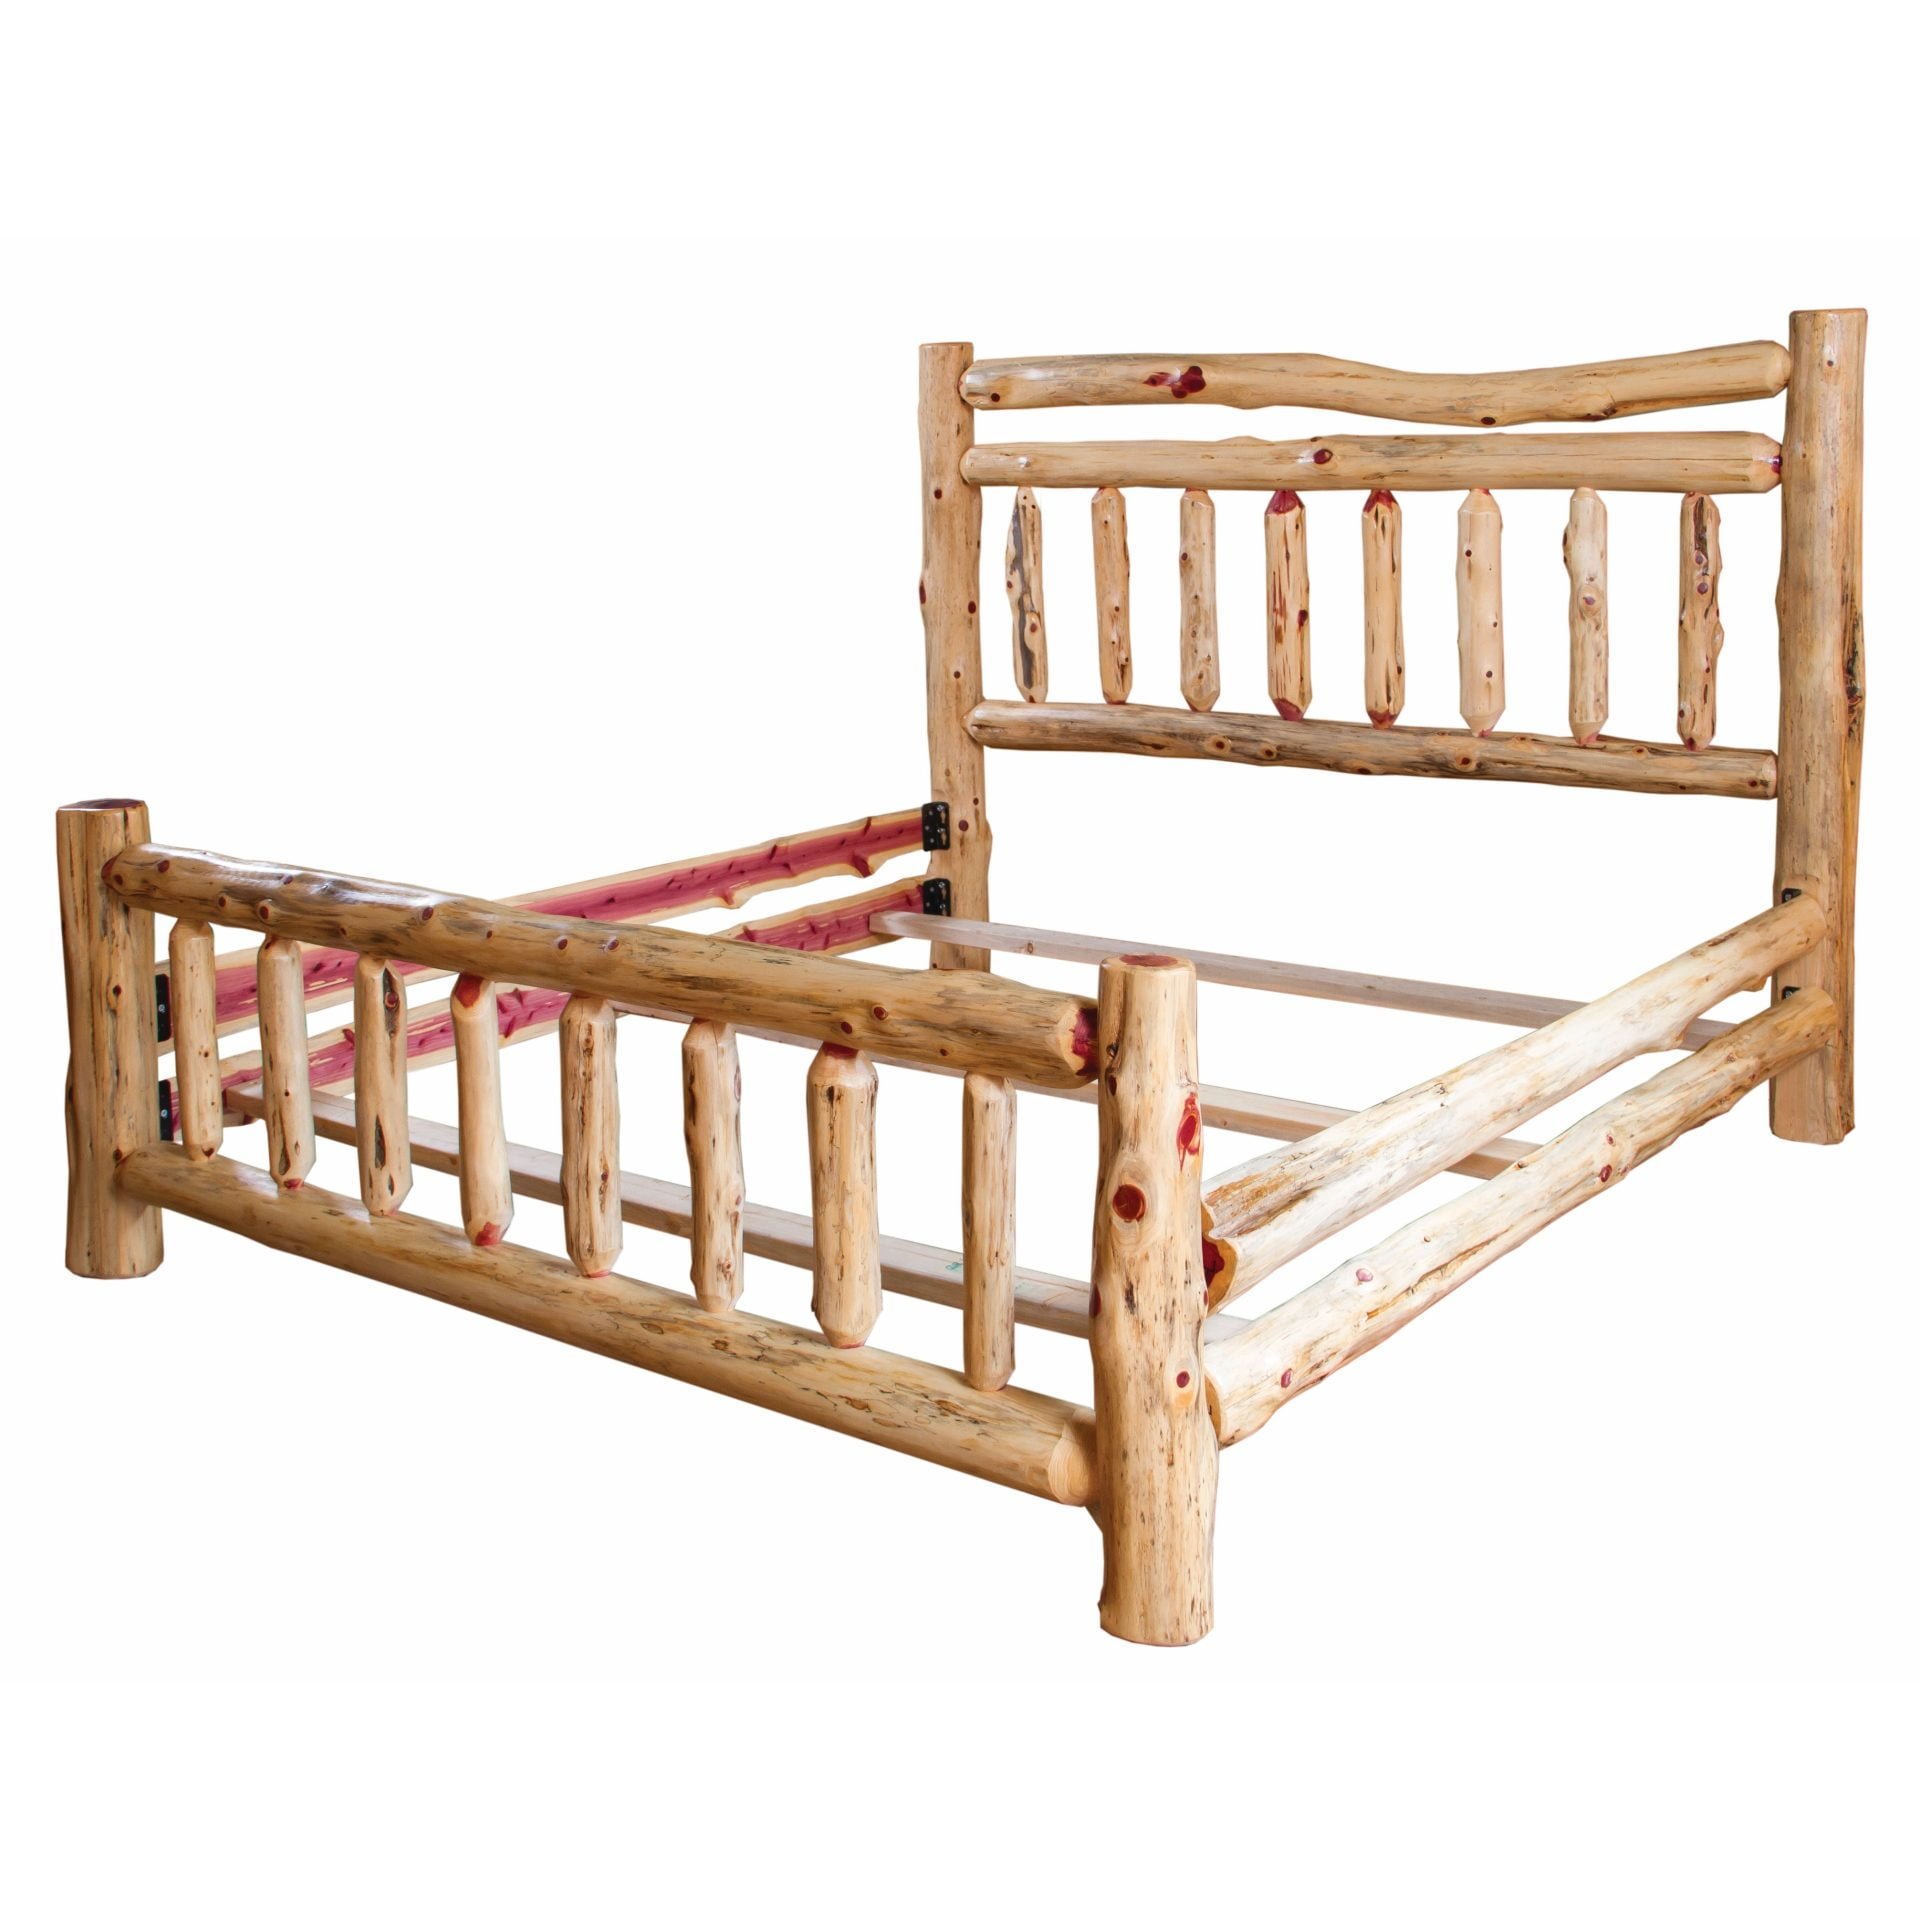 Rustic Red Cedar Log Mission Style Double Top Rail Bed